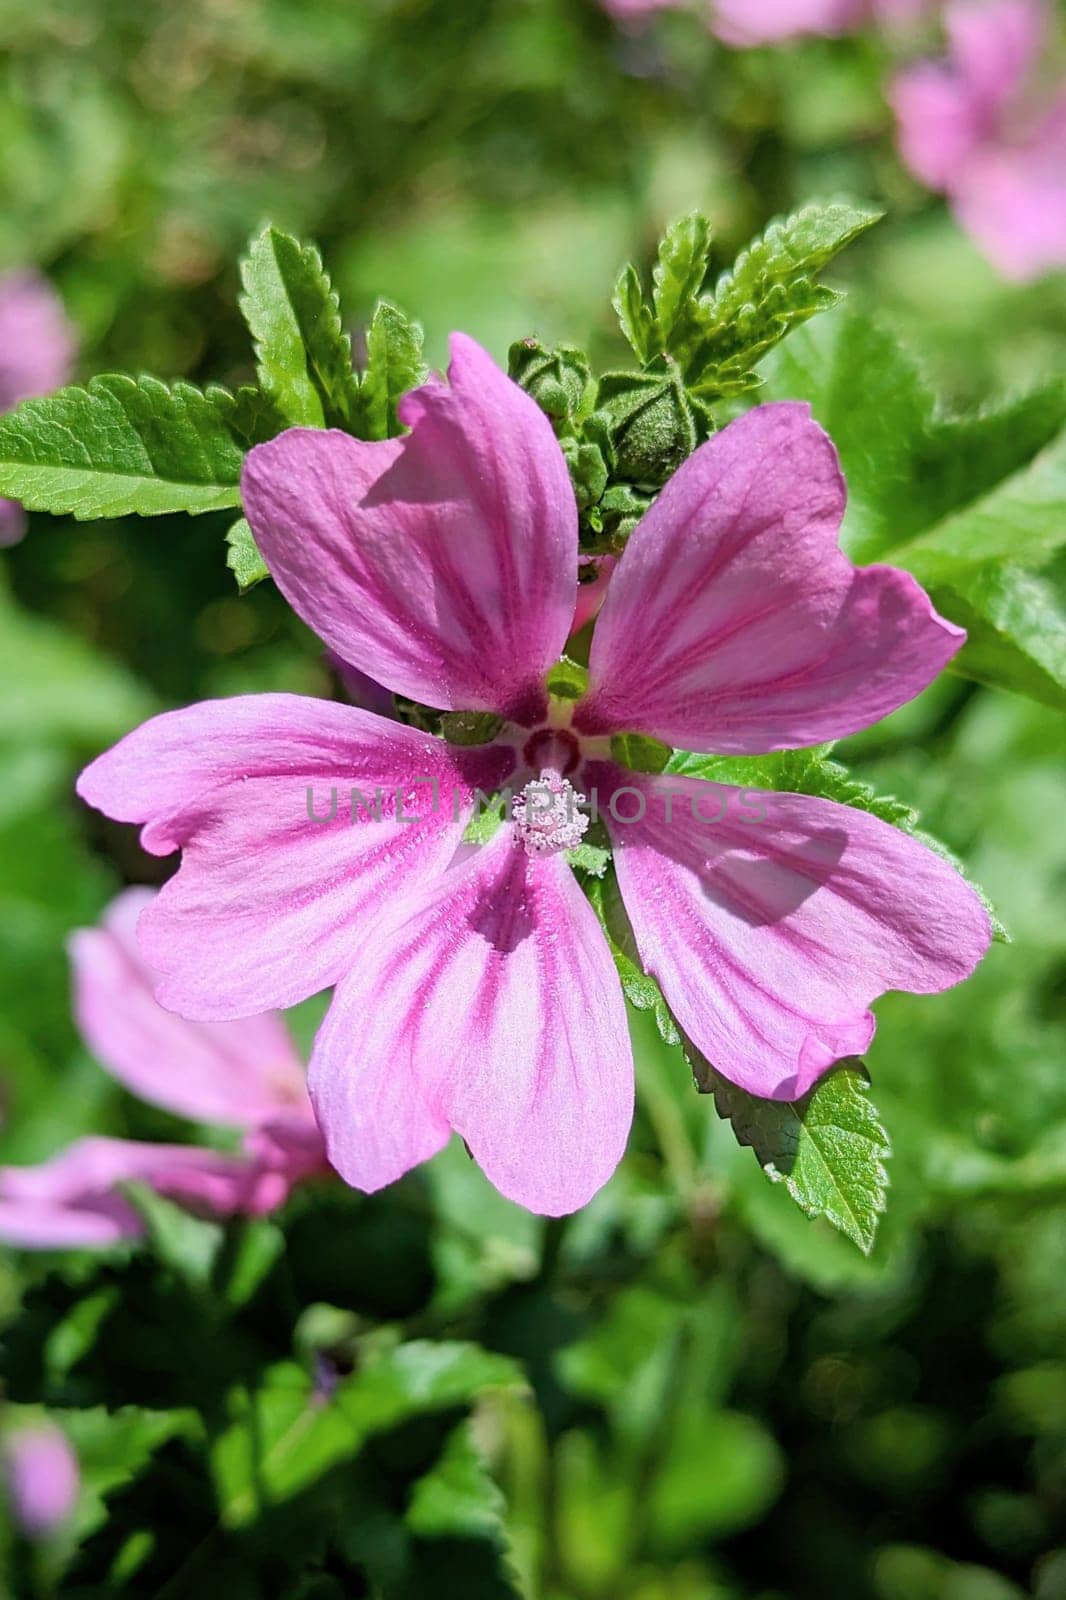 A macro shot of a magenta flower with green leaves in the backdrop. The plant is an herbaceous groundcover, an annual flowering plant